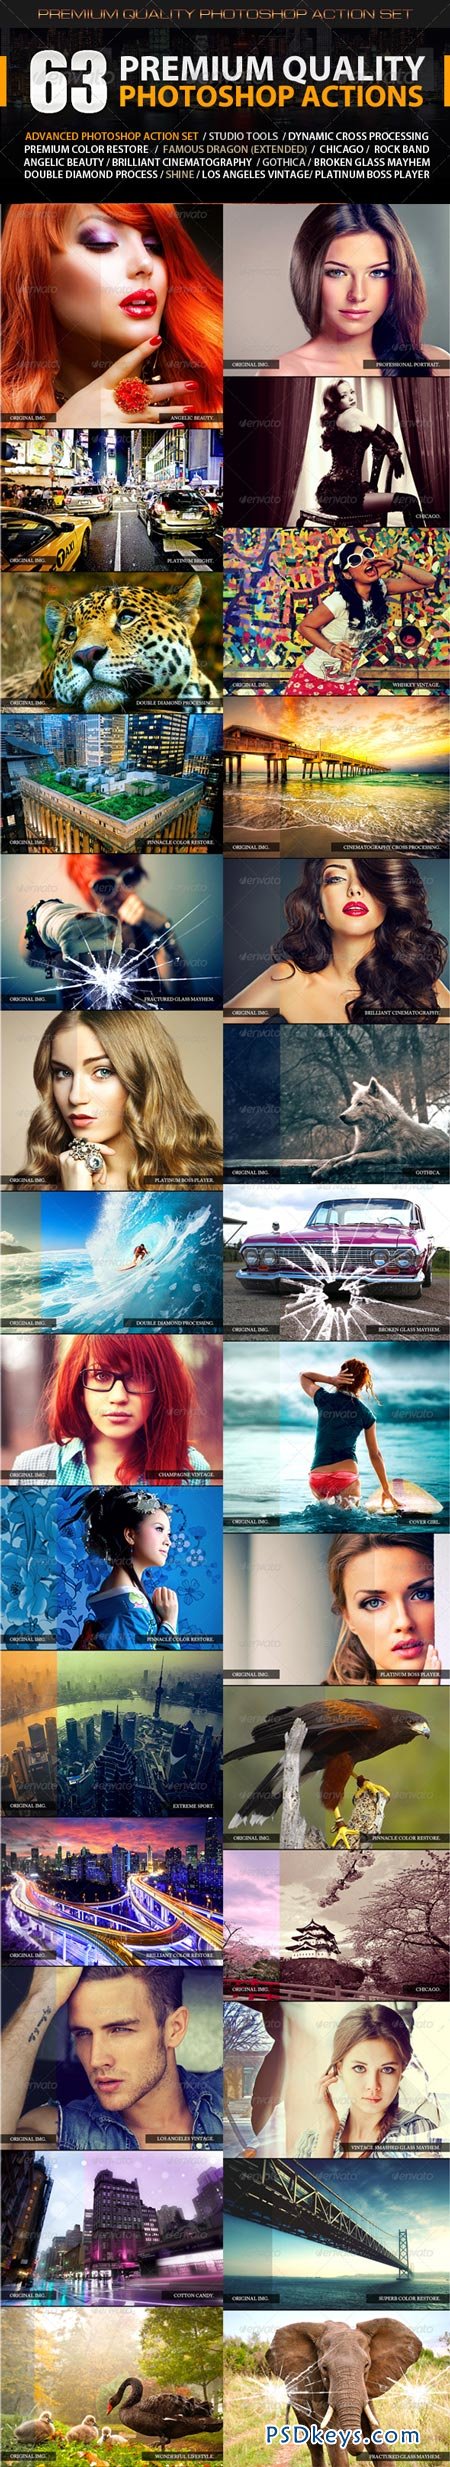 65+ exquisite photoshop actions free download